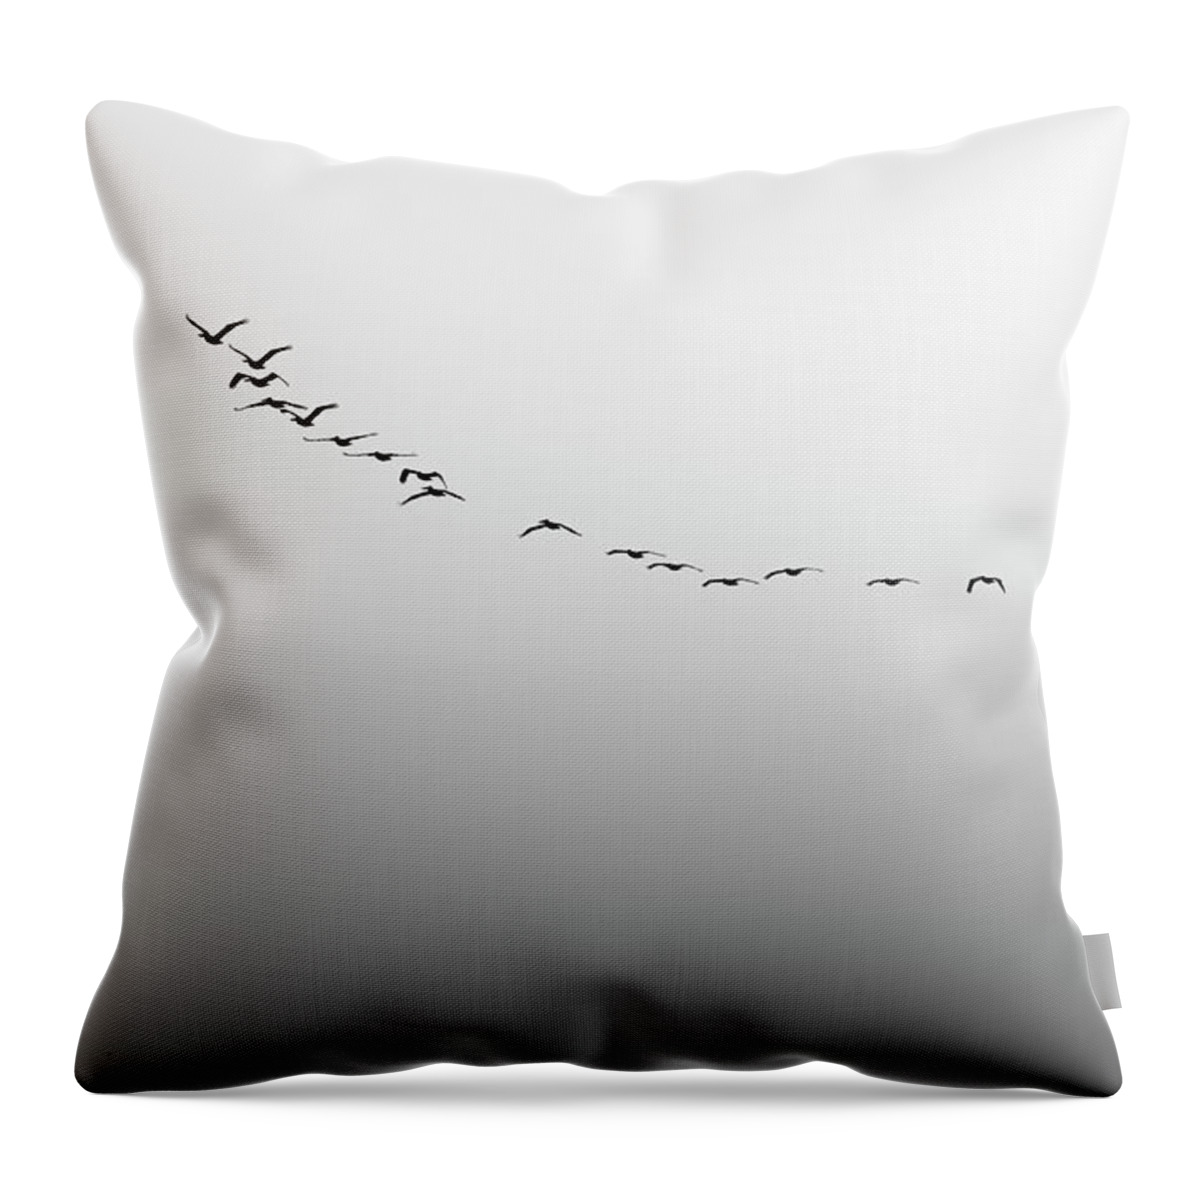 Published Throw Pillow featuring the photograph Walking Alone by Enrique Pelaez